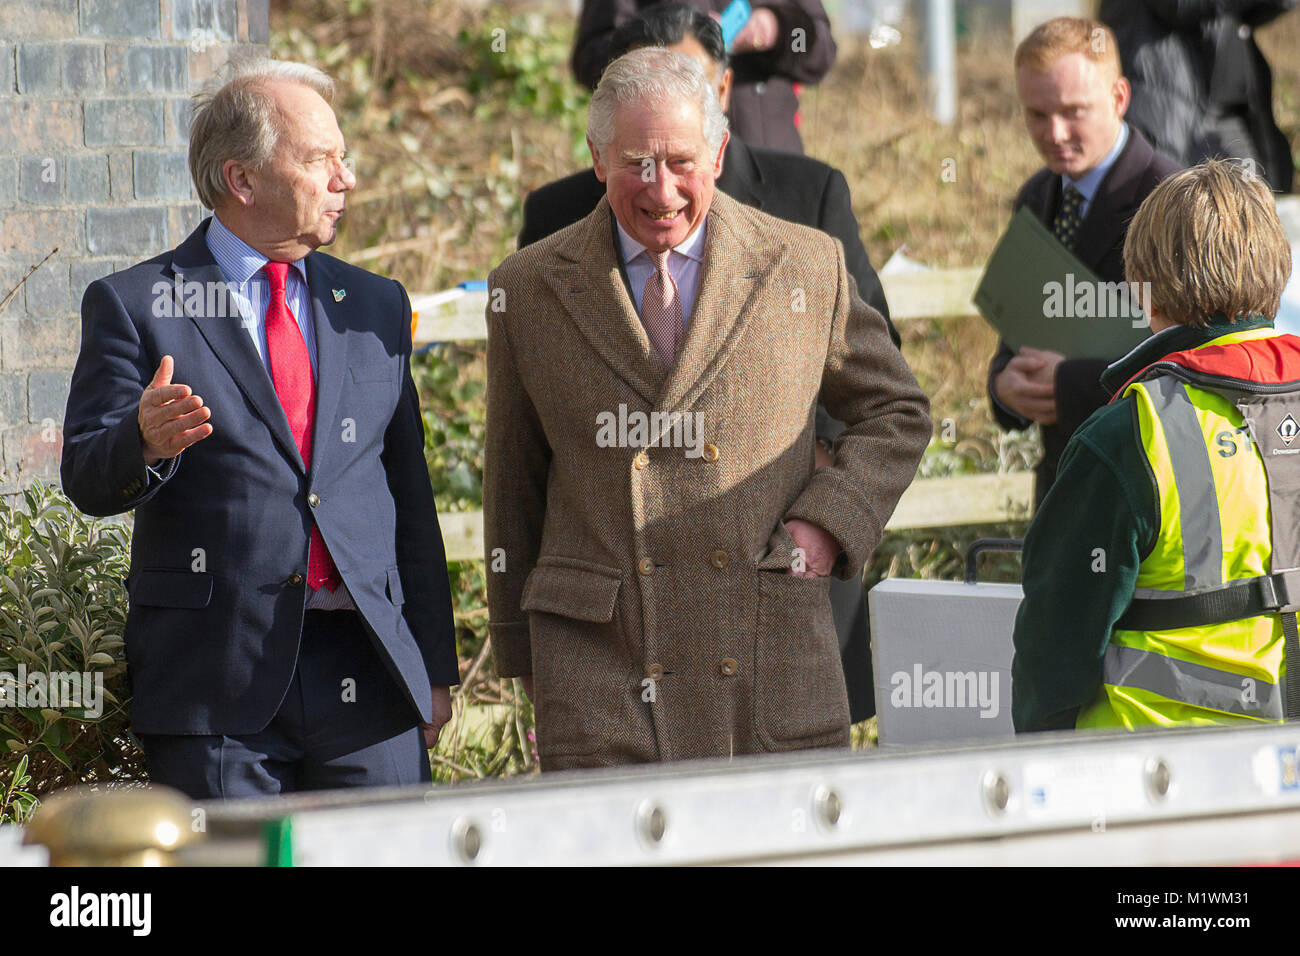 Stroud, Gloucestershire, UK. 2nd February, 2018. HRH The Prince of Wales walks along the canal side at Wallbridge Lock, Stroud, UK. Prince Charles visited to officially open the newly restored Wallbridge Lower Lock, part of the Cotswold Canals Project. Picture: Carl Hewlett/Alamy Live News Stock Photo